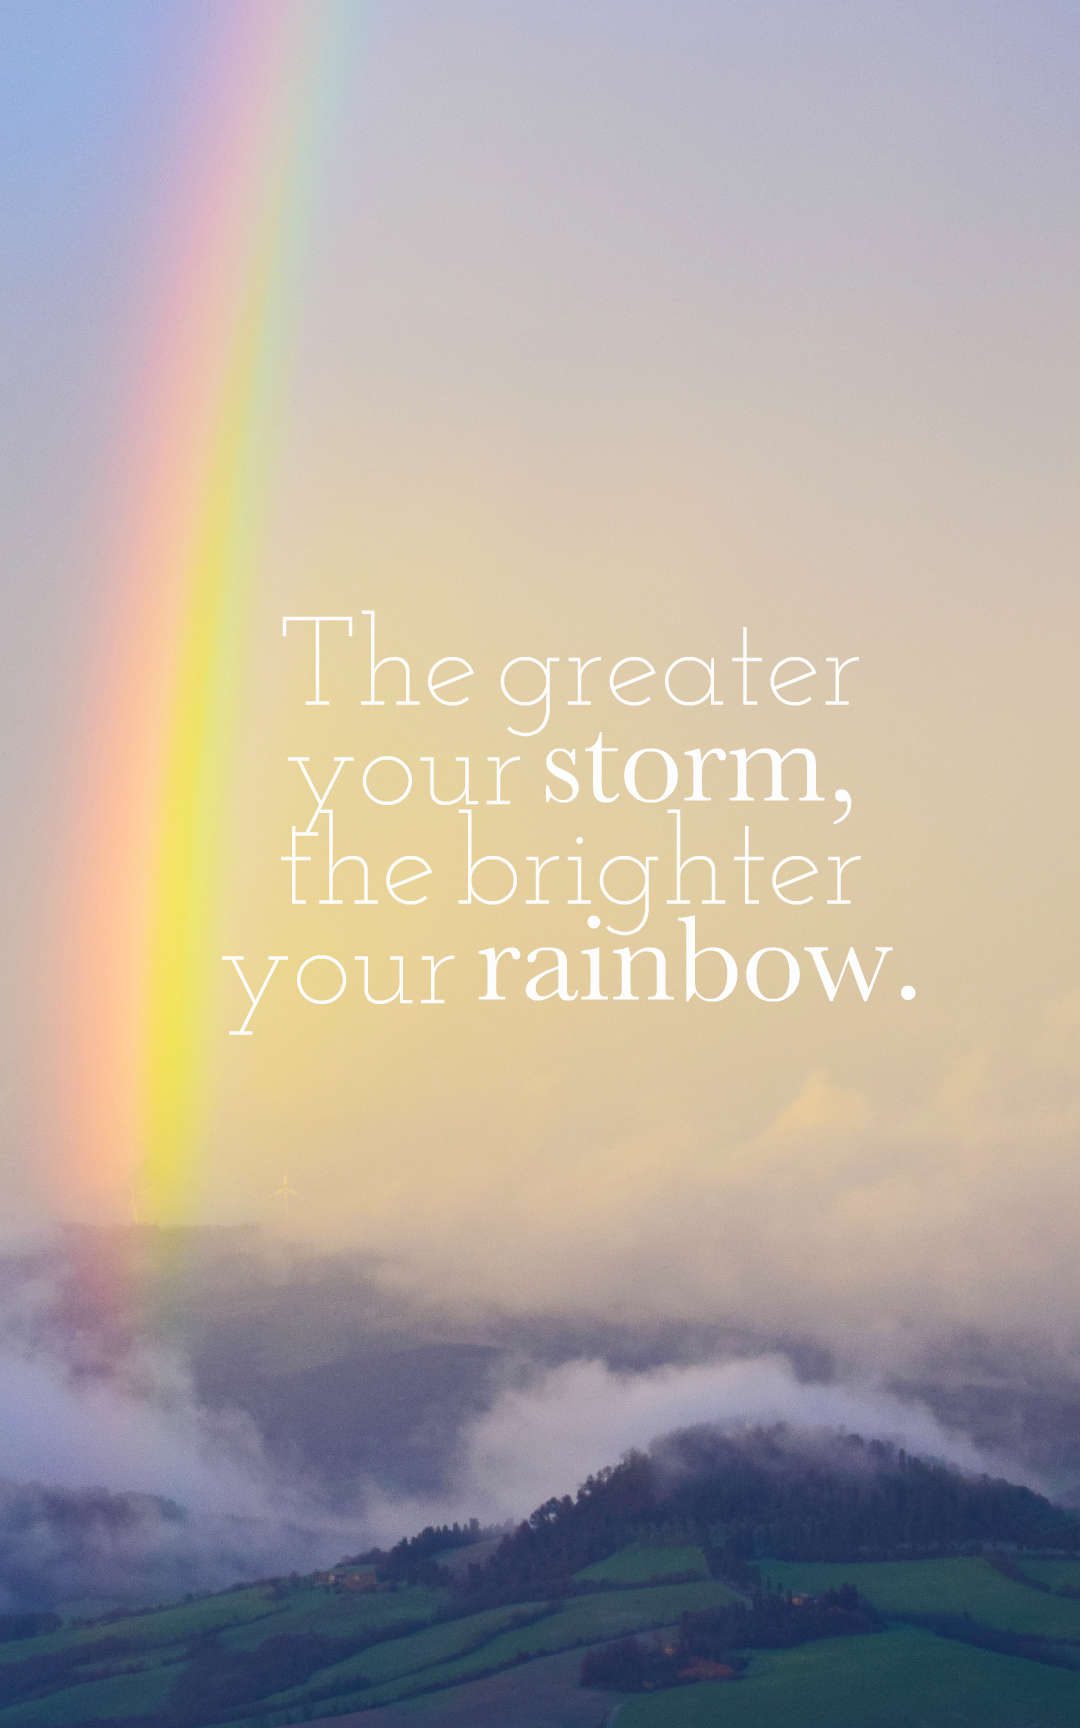 30 Beautiful Rainbow Quotes and Sayings